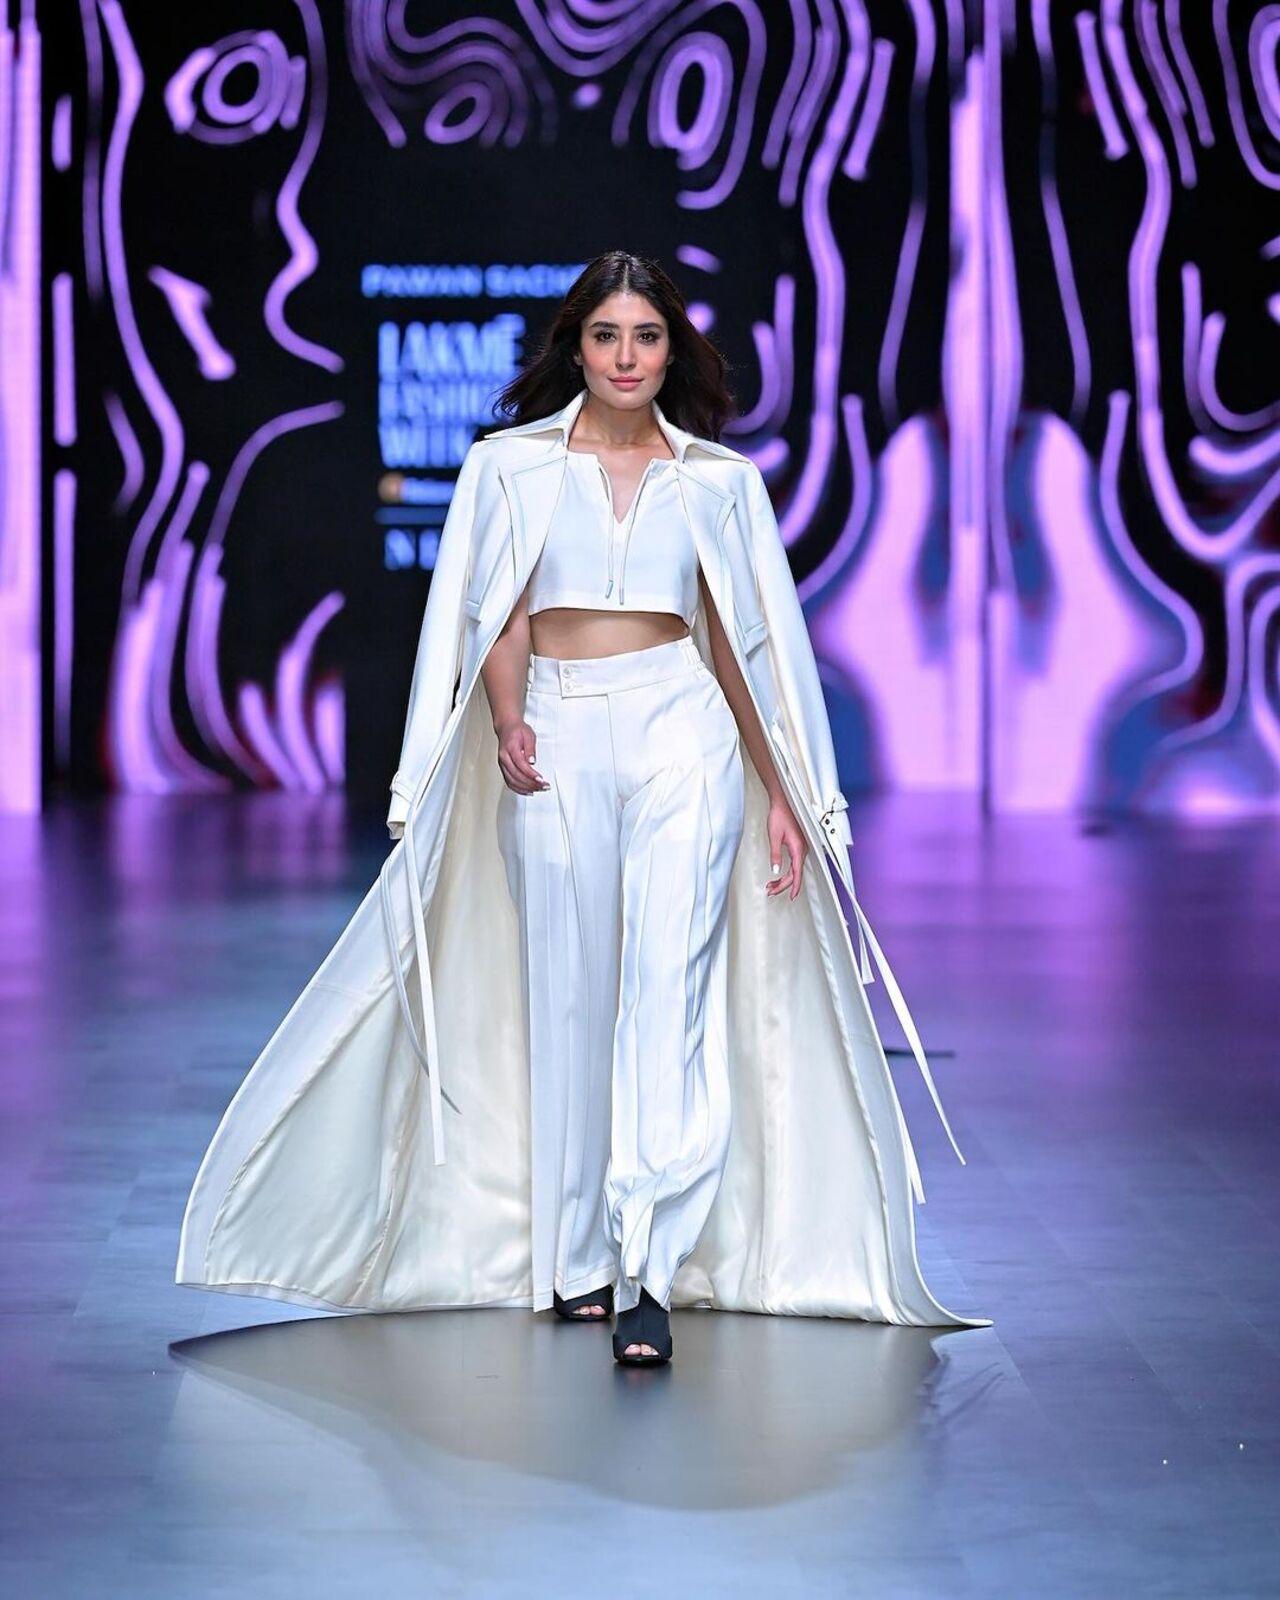 Kritika Kamra walks elegantly in a white cape style outfit